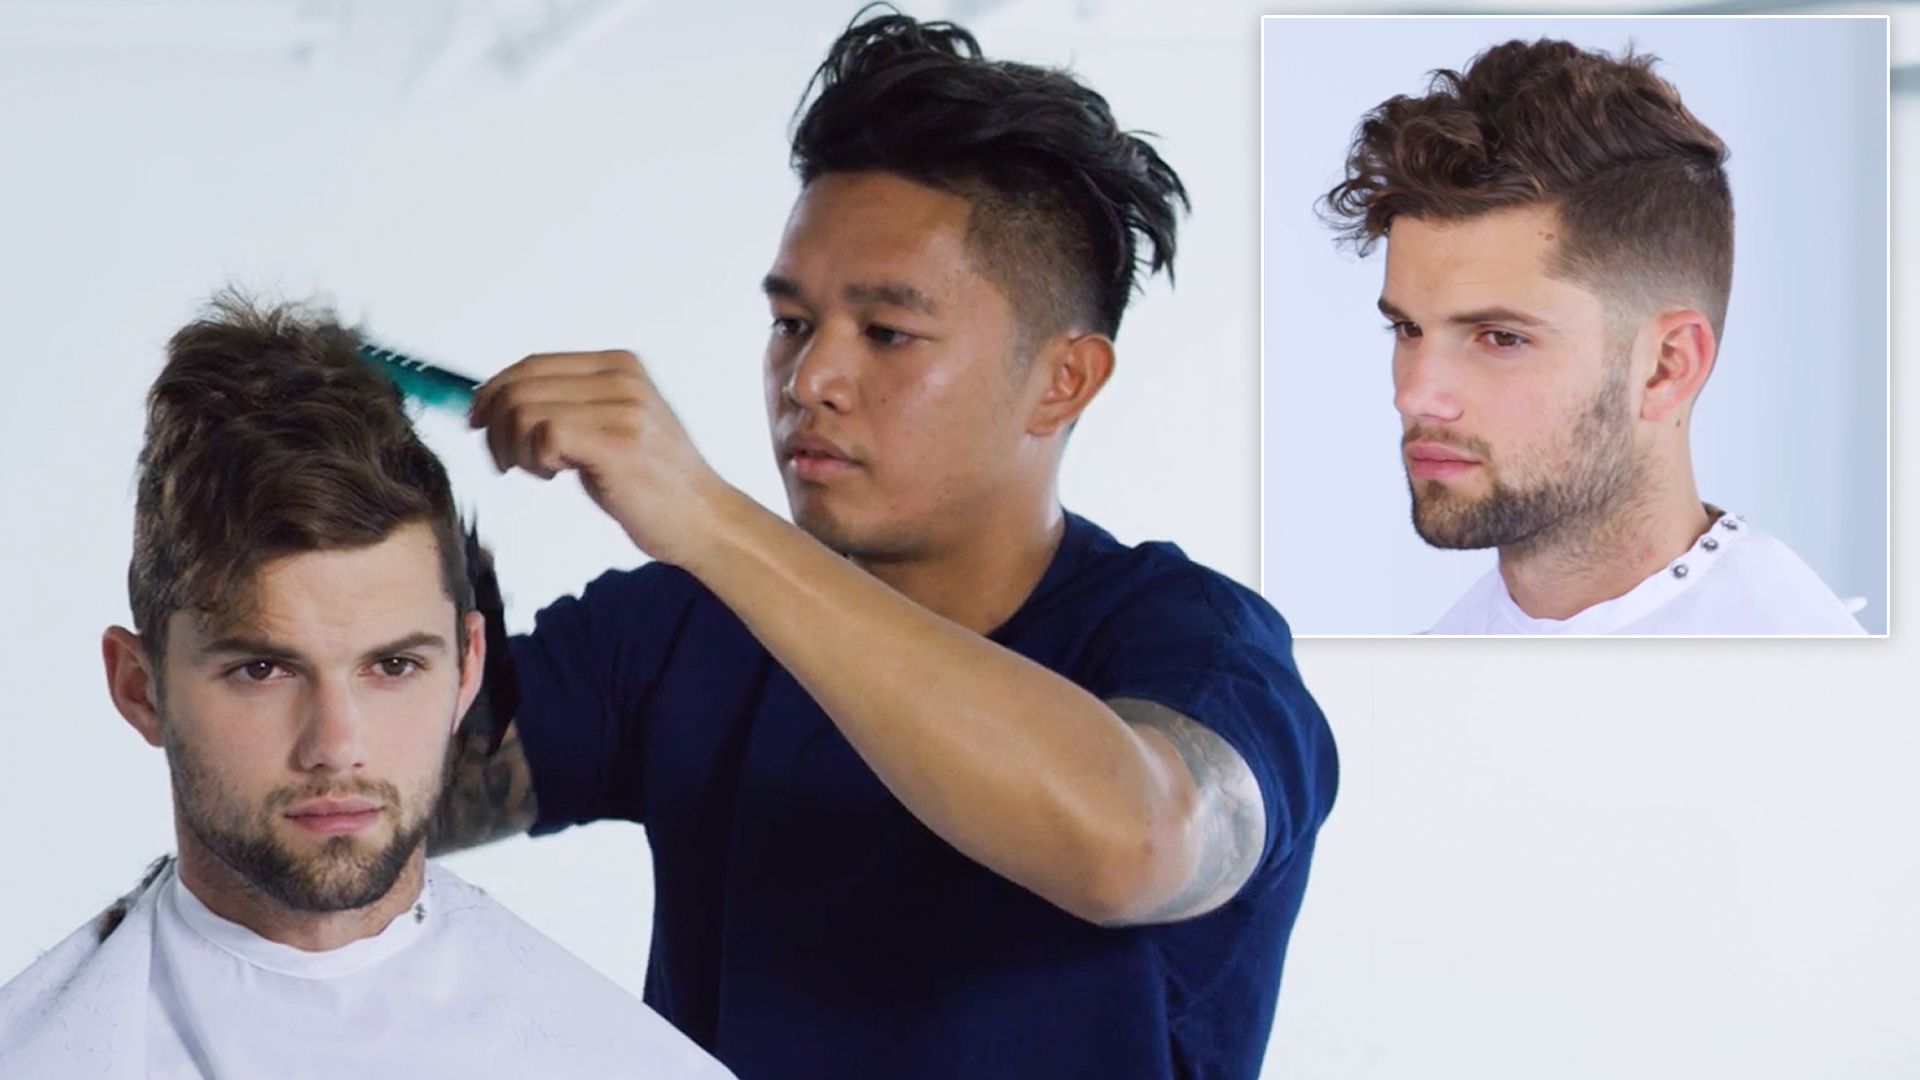 Watch How to Get The Newest Classic 'Do, The Undercut | GQ